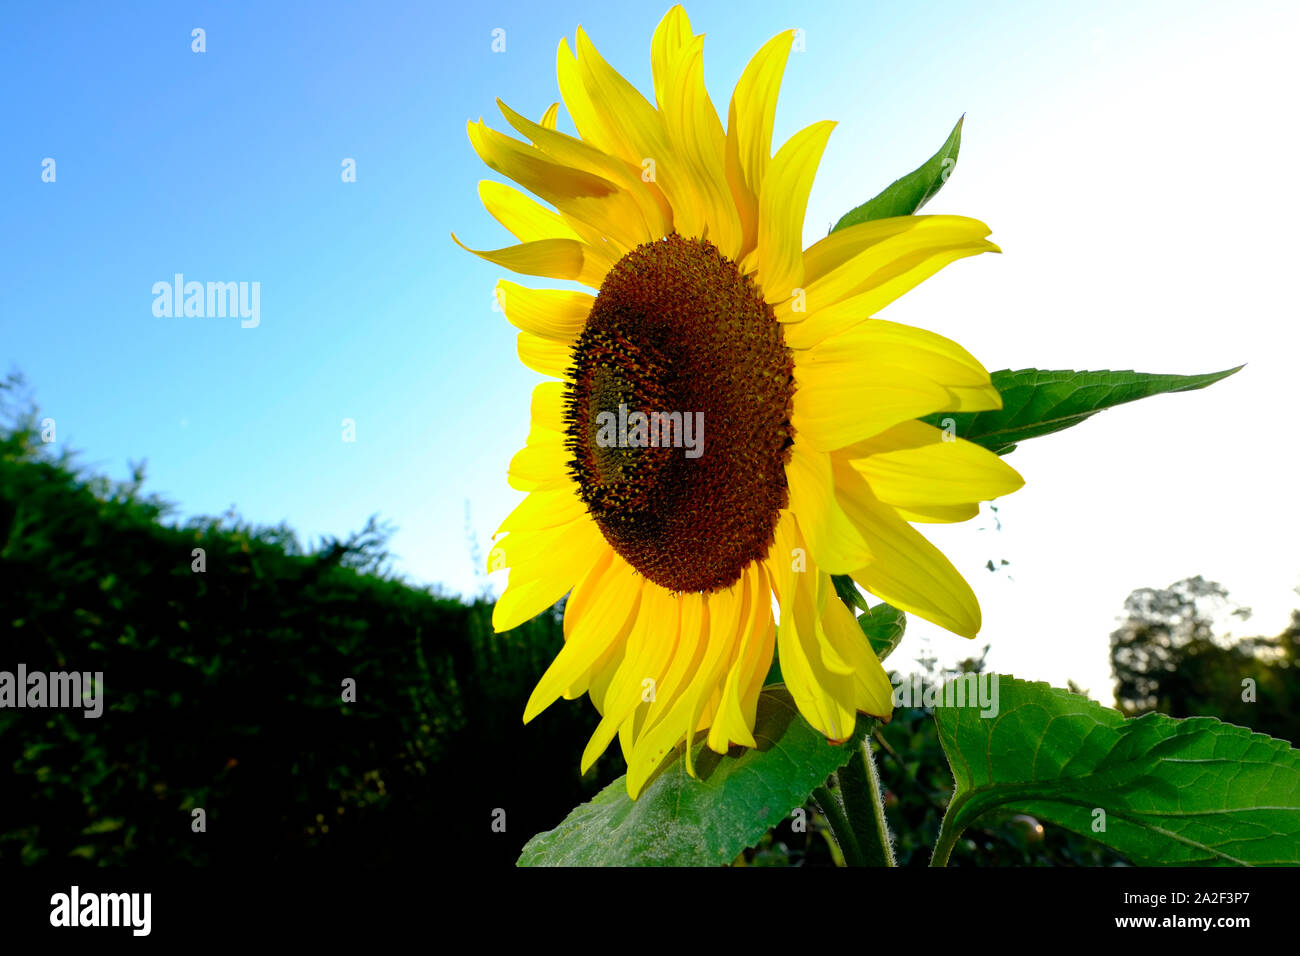 A giant sunflower growing in the garden against a blue summer sky Stock Photo